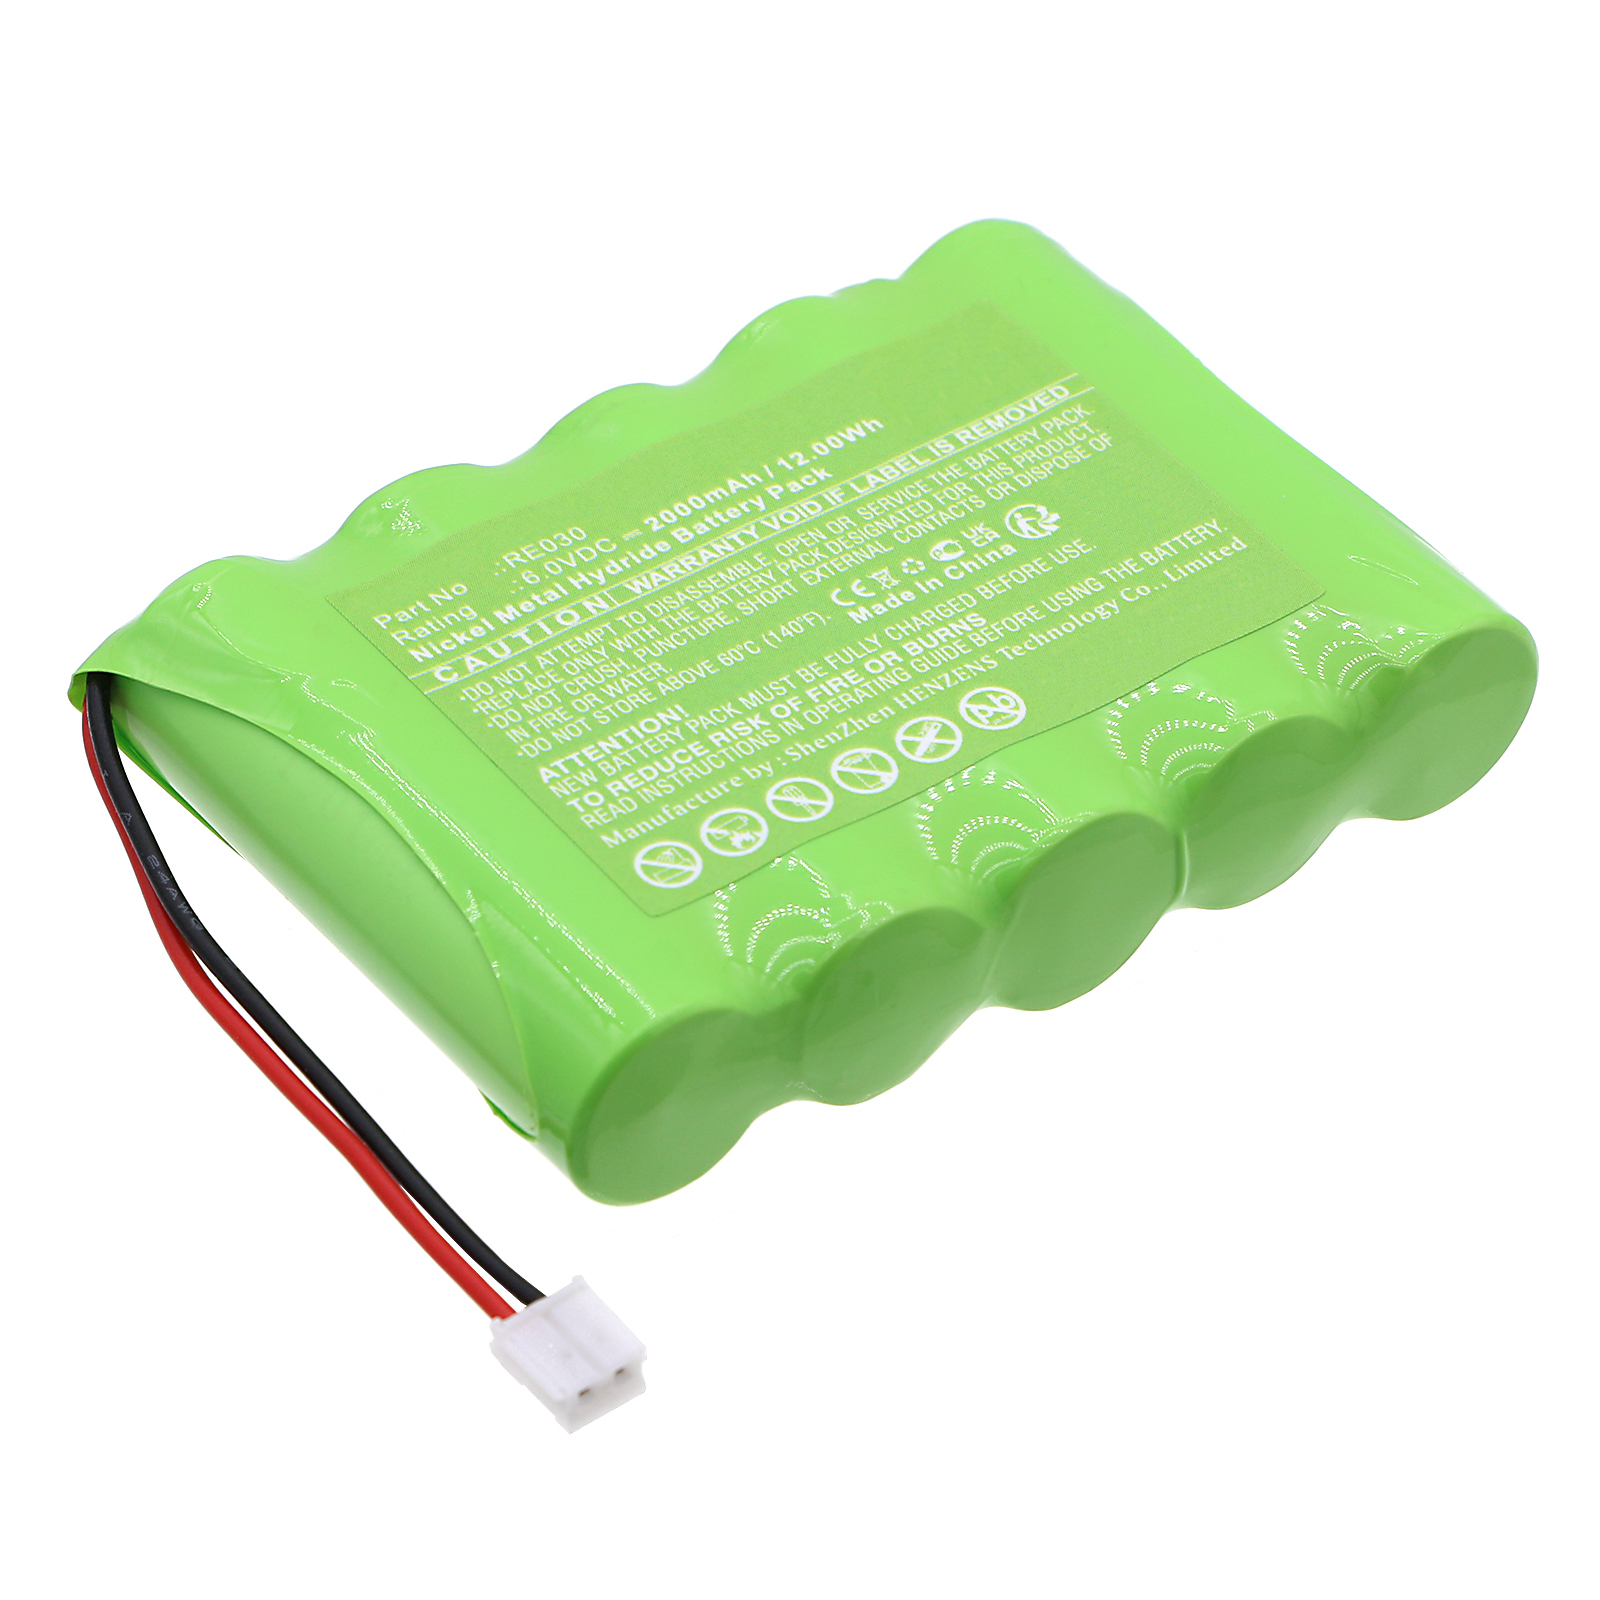 Synergy Digital Security and Safety Battery, Compatible with Alula RE030 Security and Safety Battery (Ni-MH, 6V, 2000mAh)